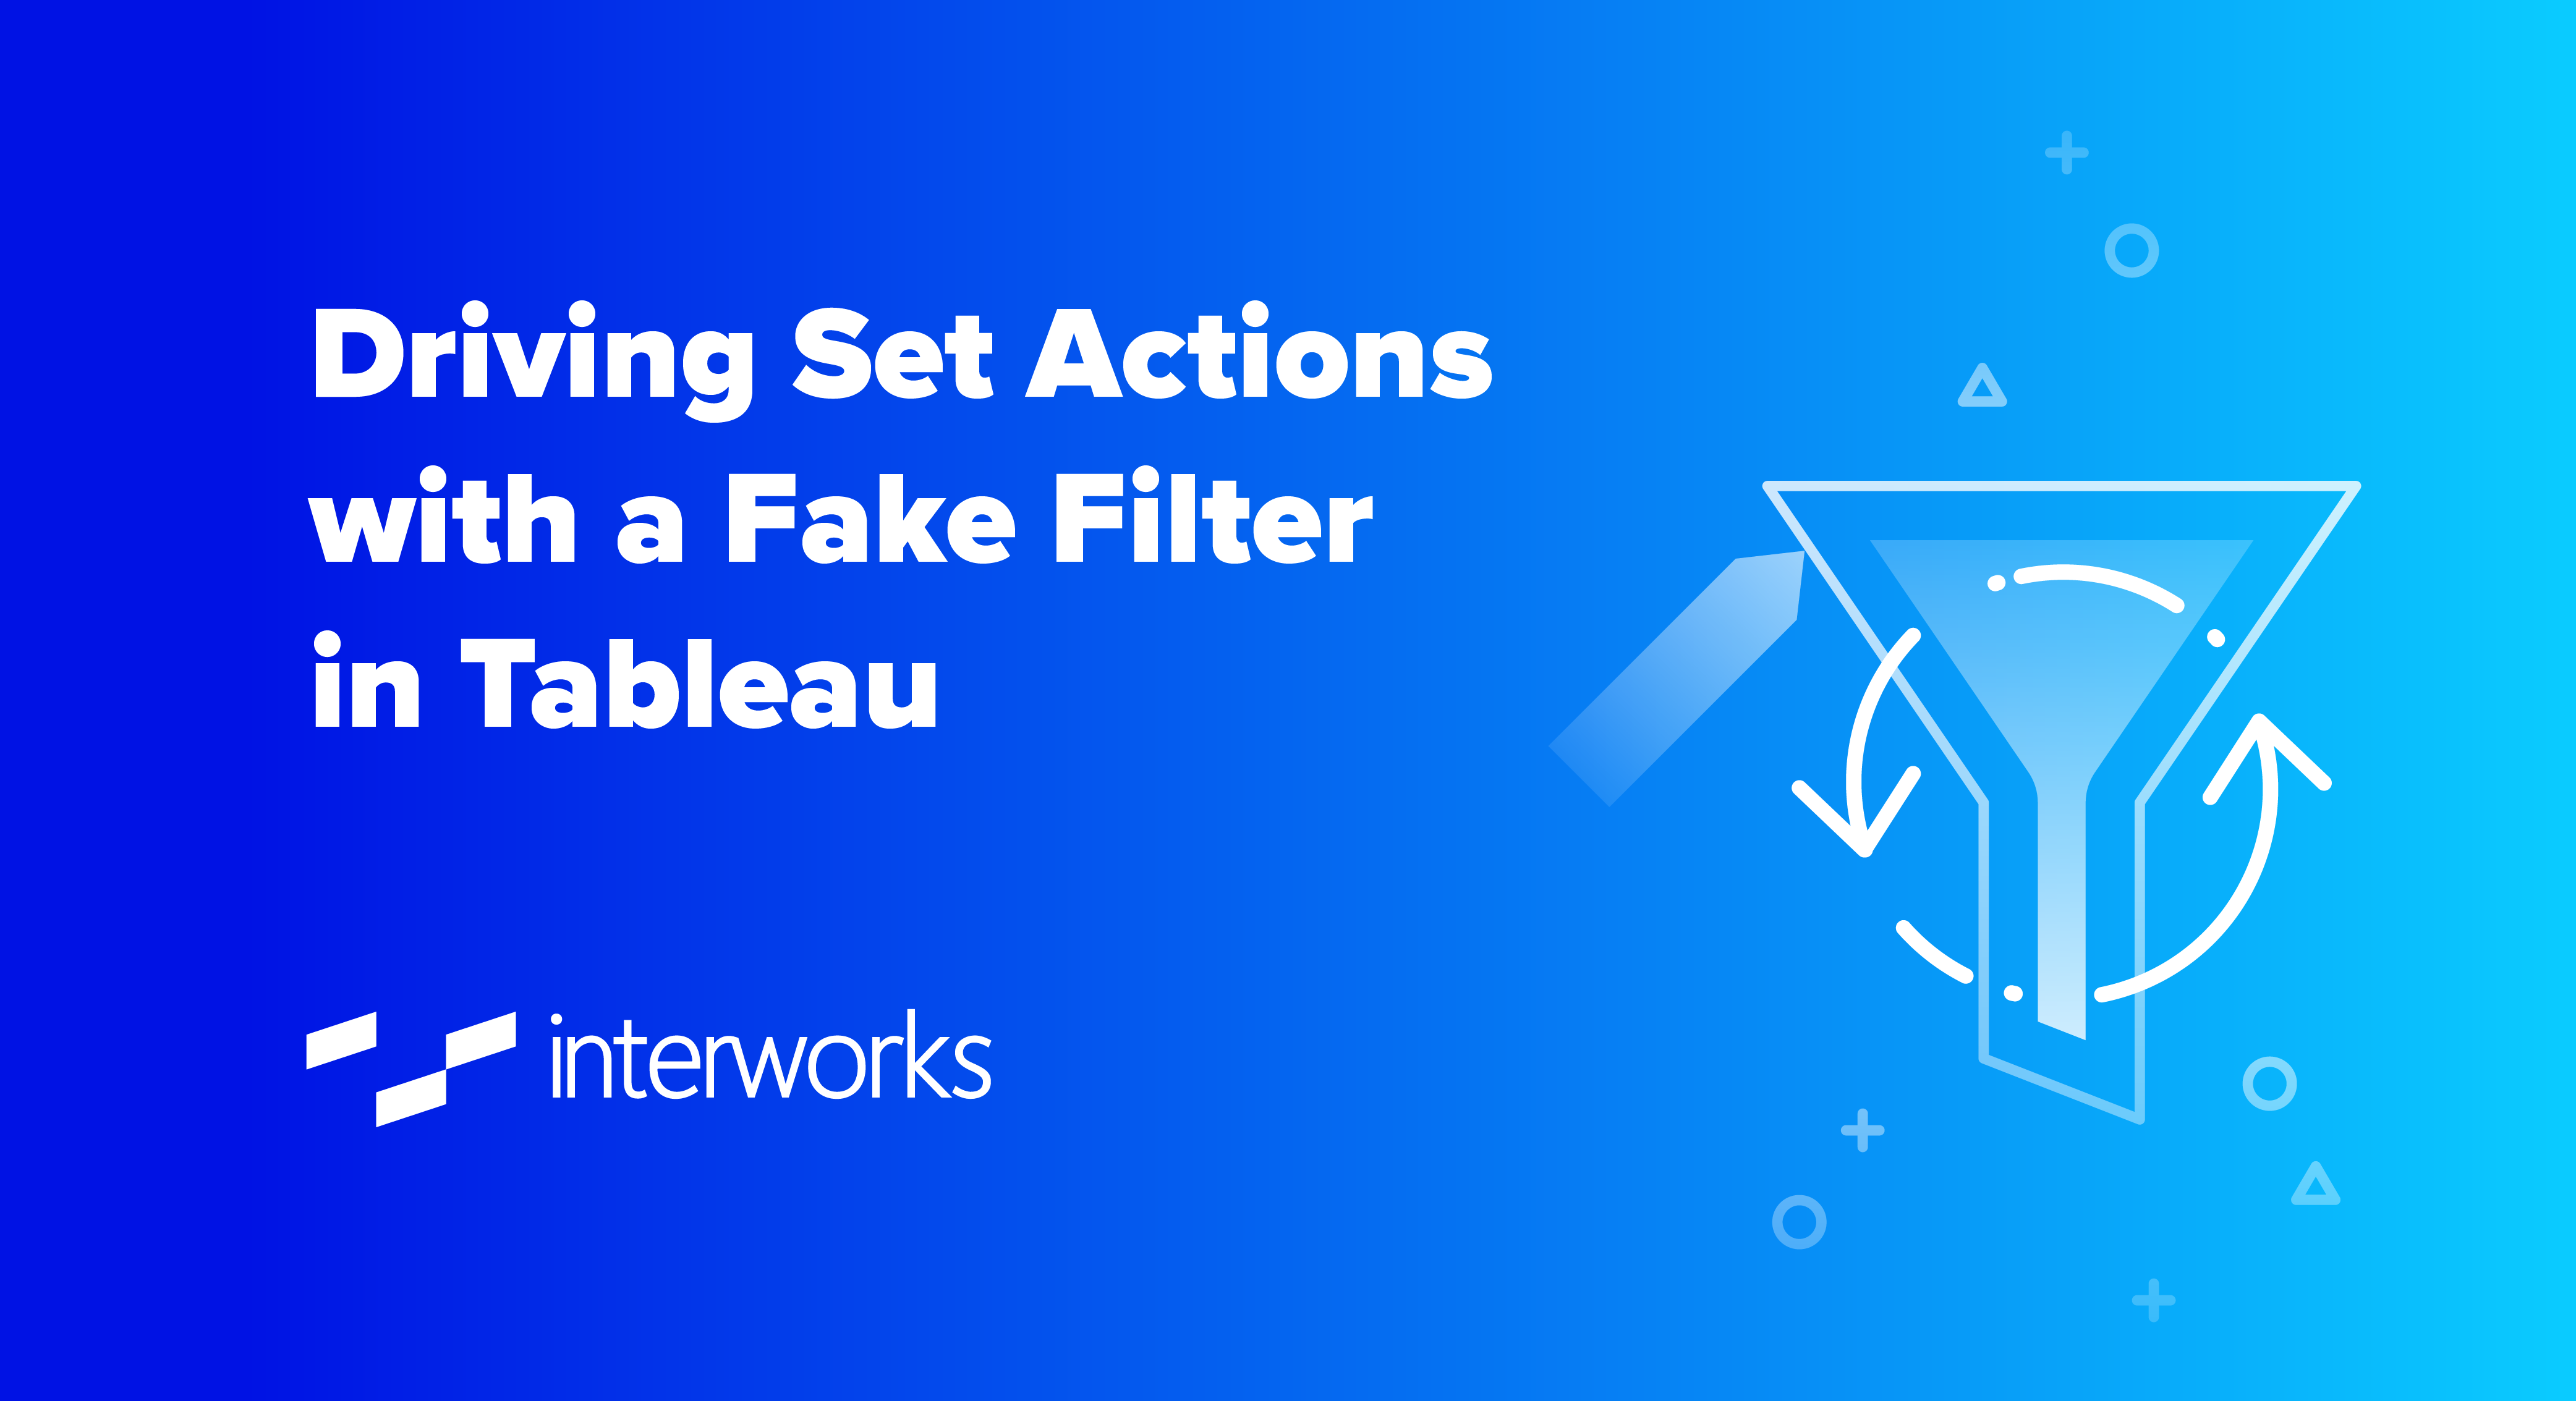 Driving Set Actions with a Fake Filter in Tableau